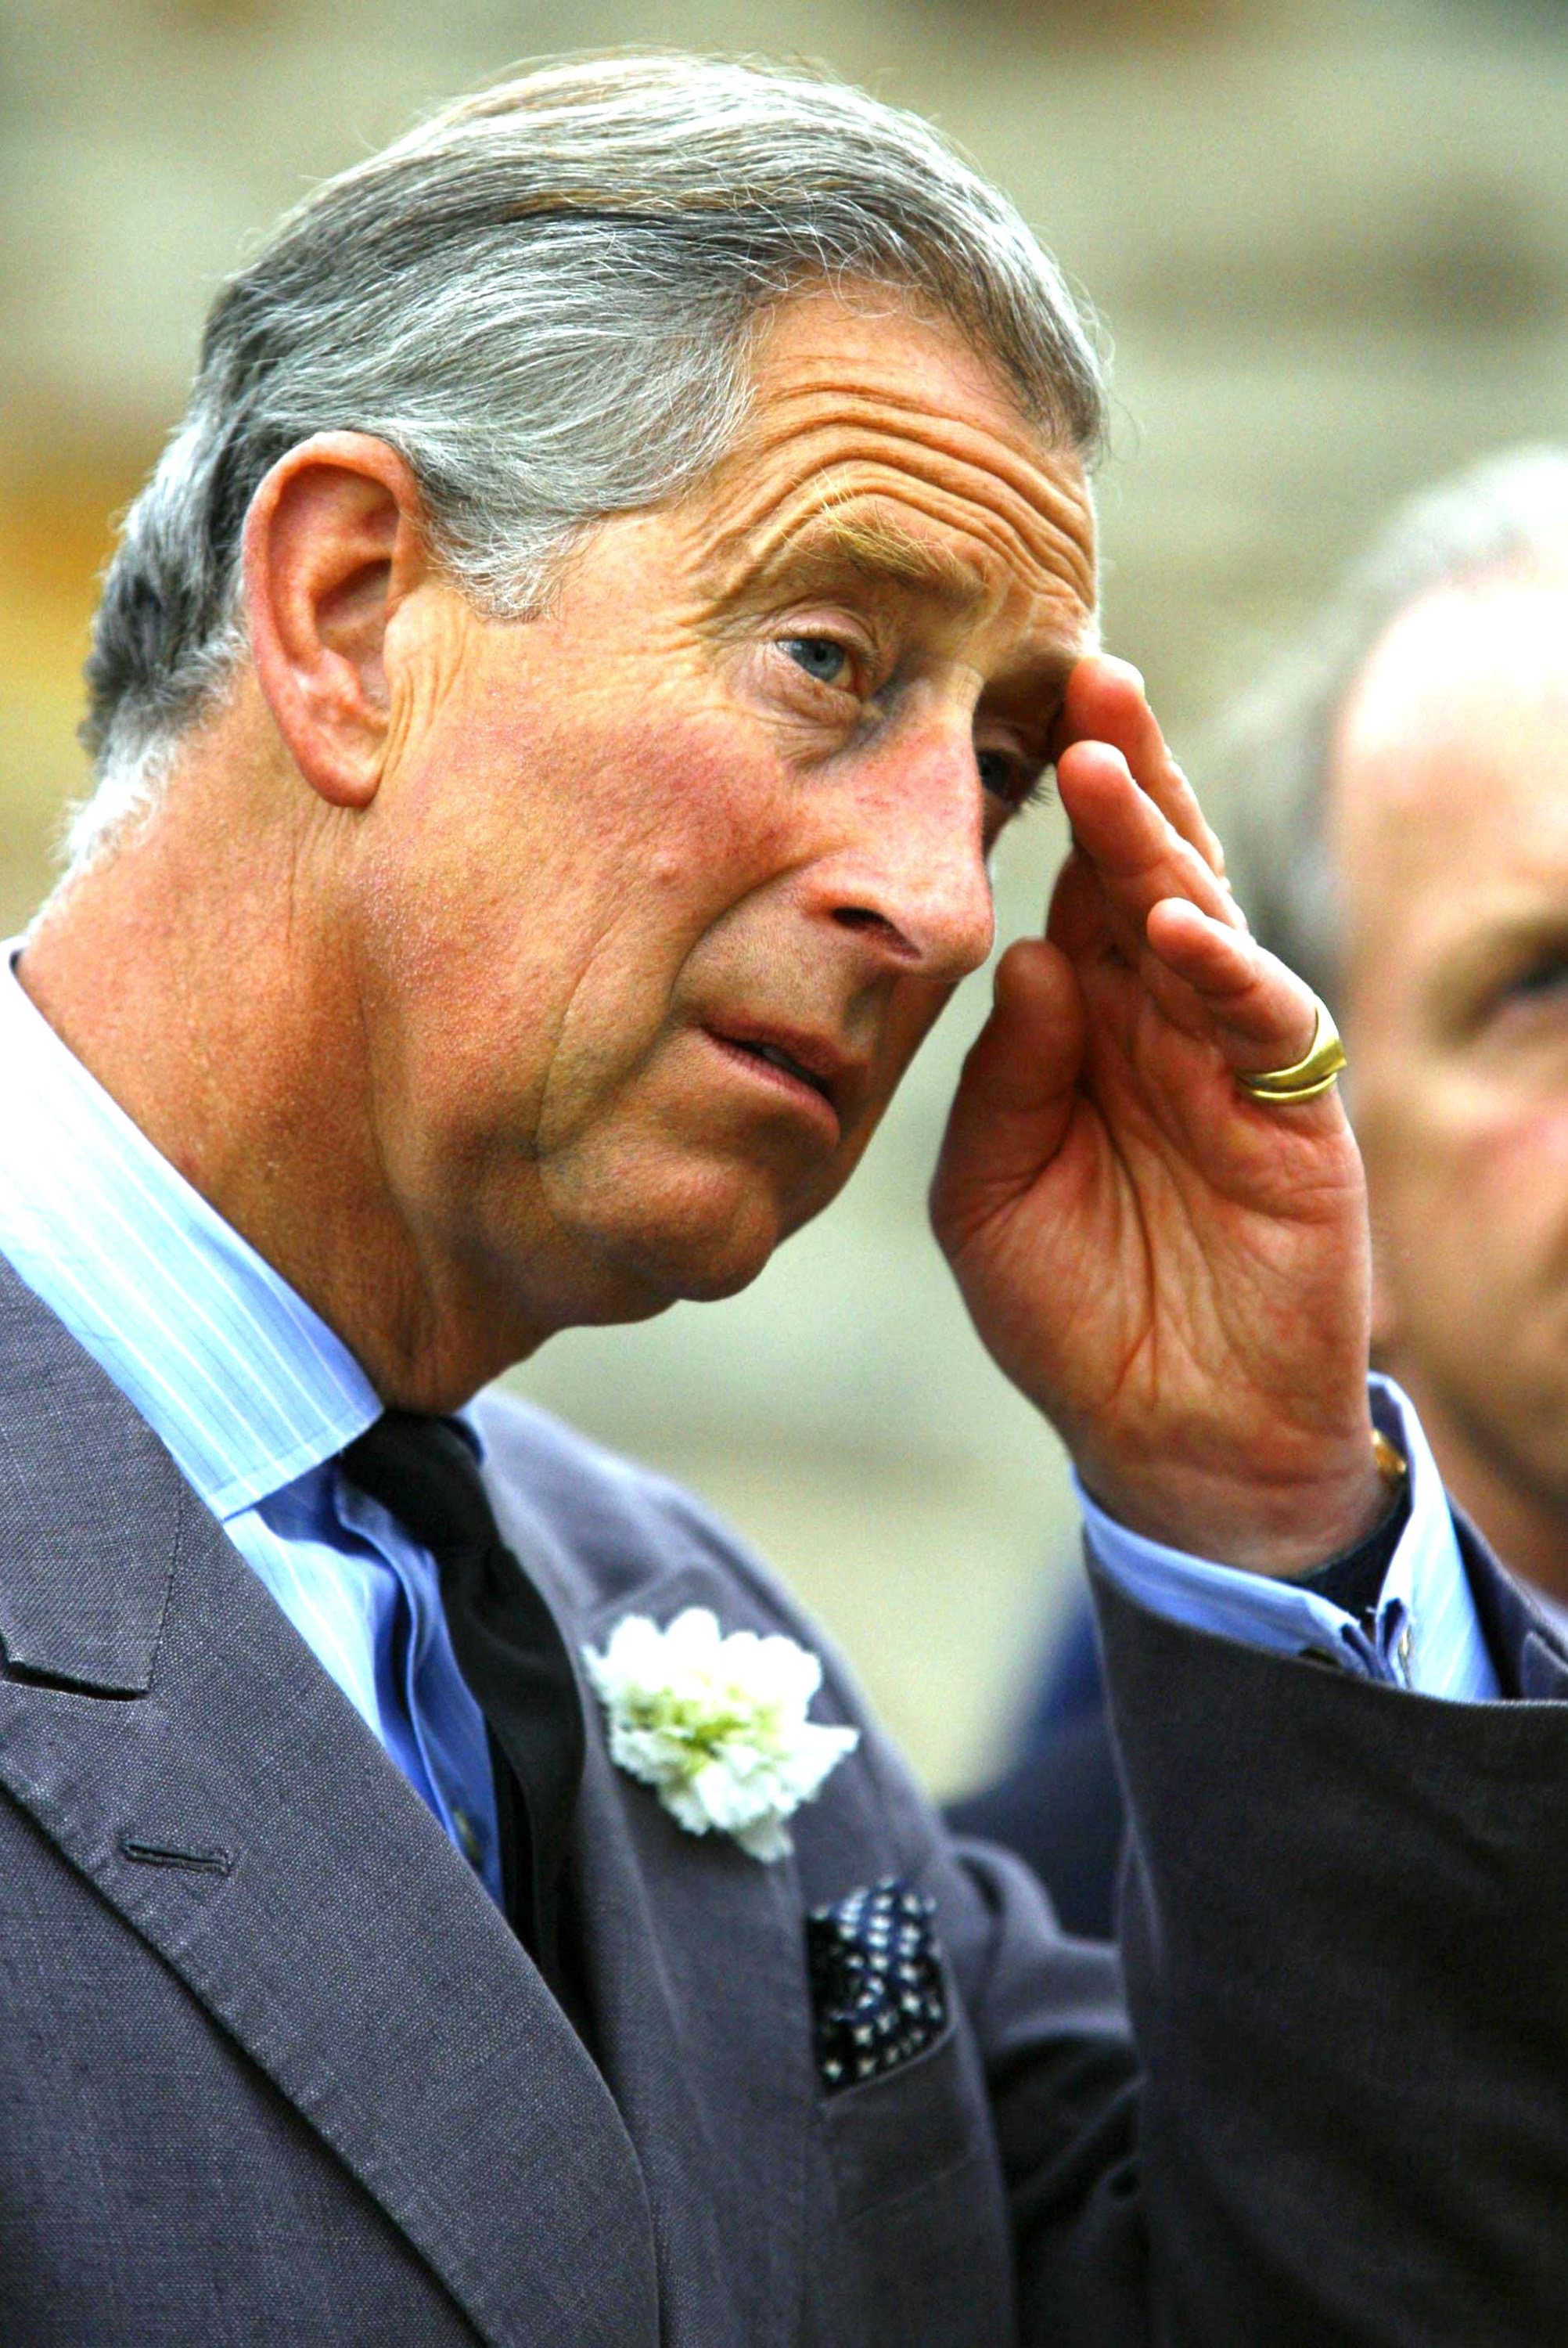 King Charles III visits a housing development in Truro, which has been built on land previously owned by The Duchy of Cornwall on June 13, 2006. | Source: Getty Images